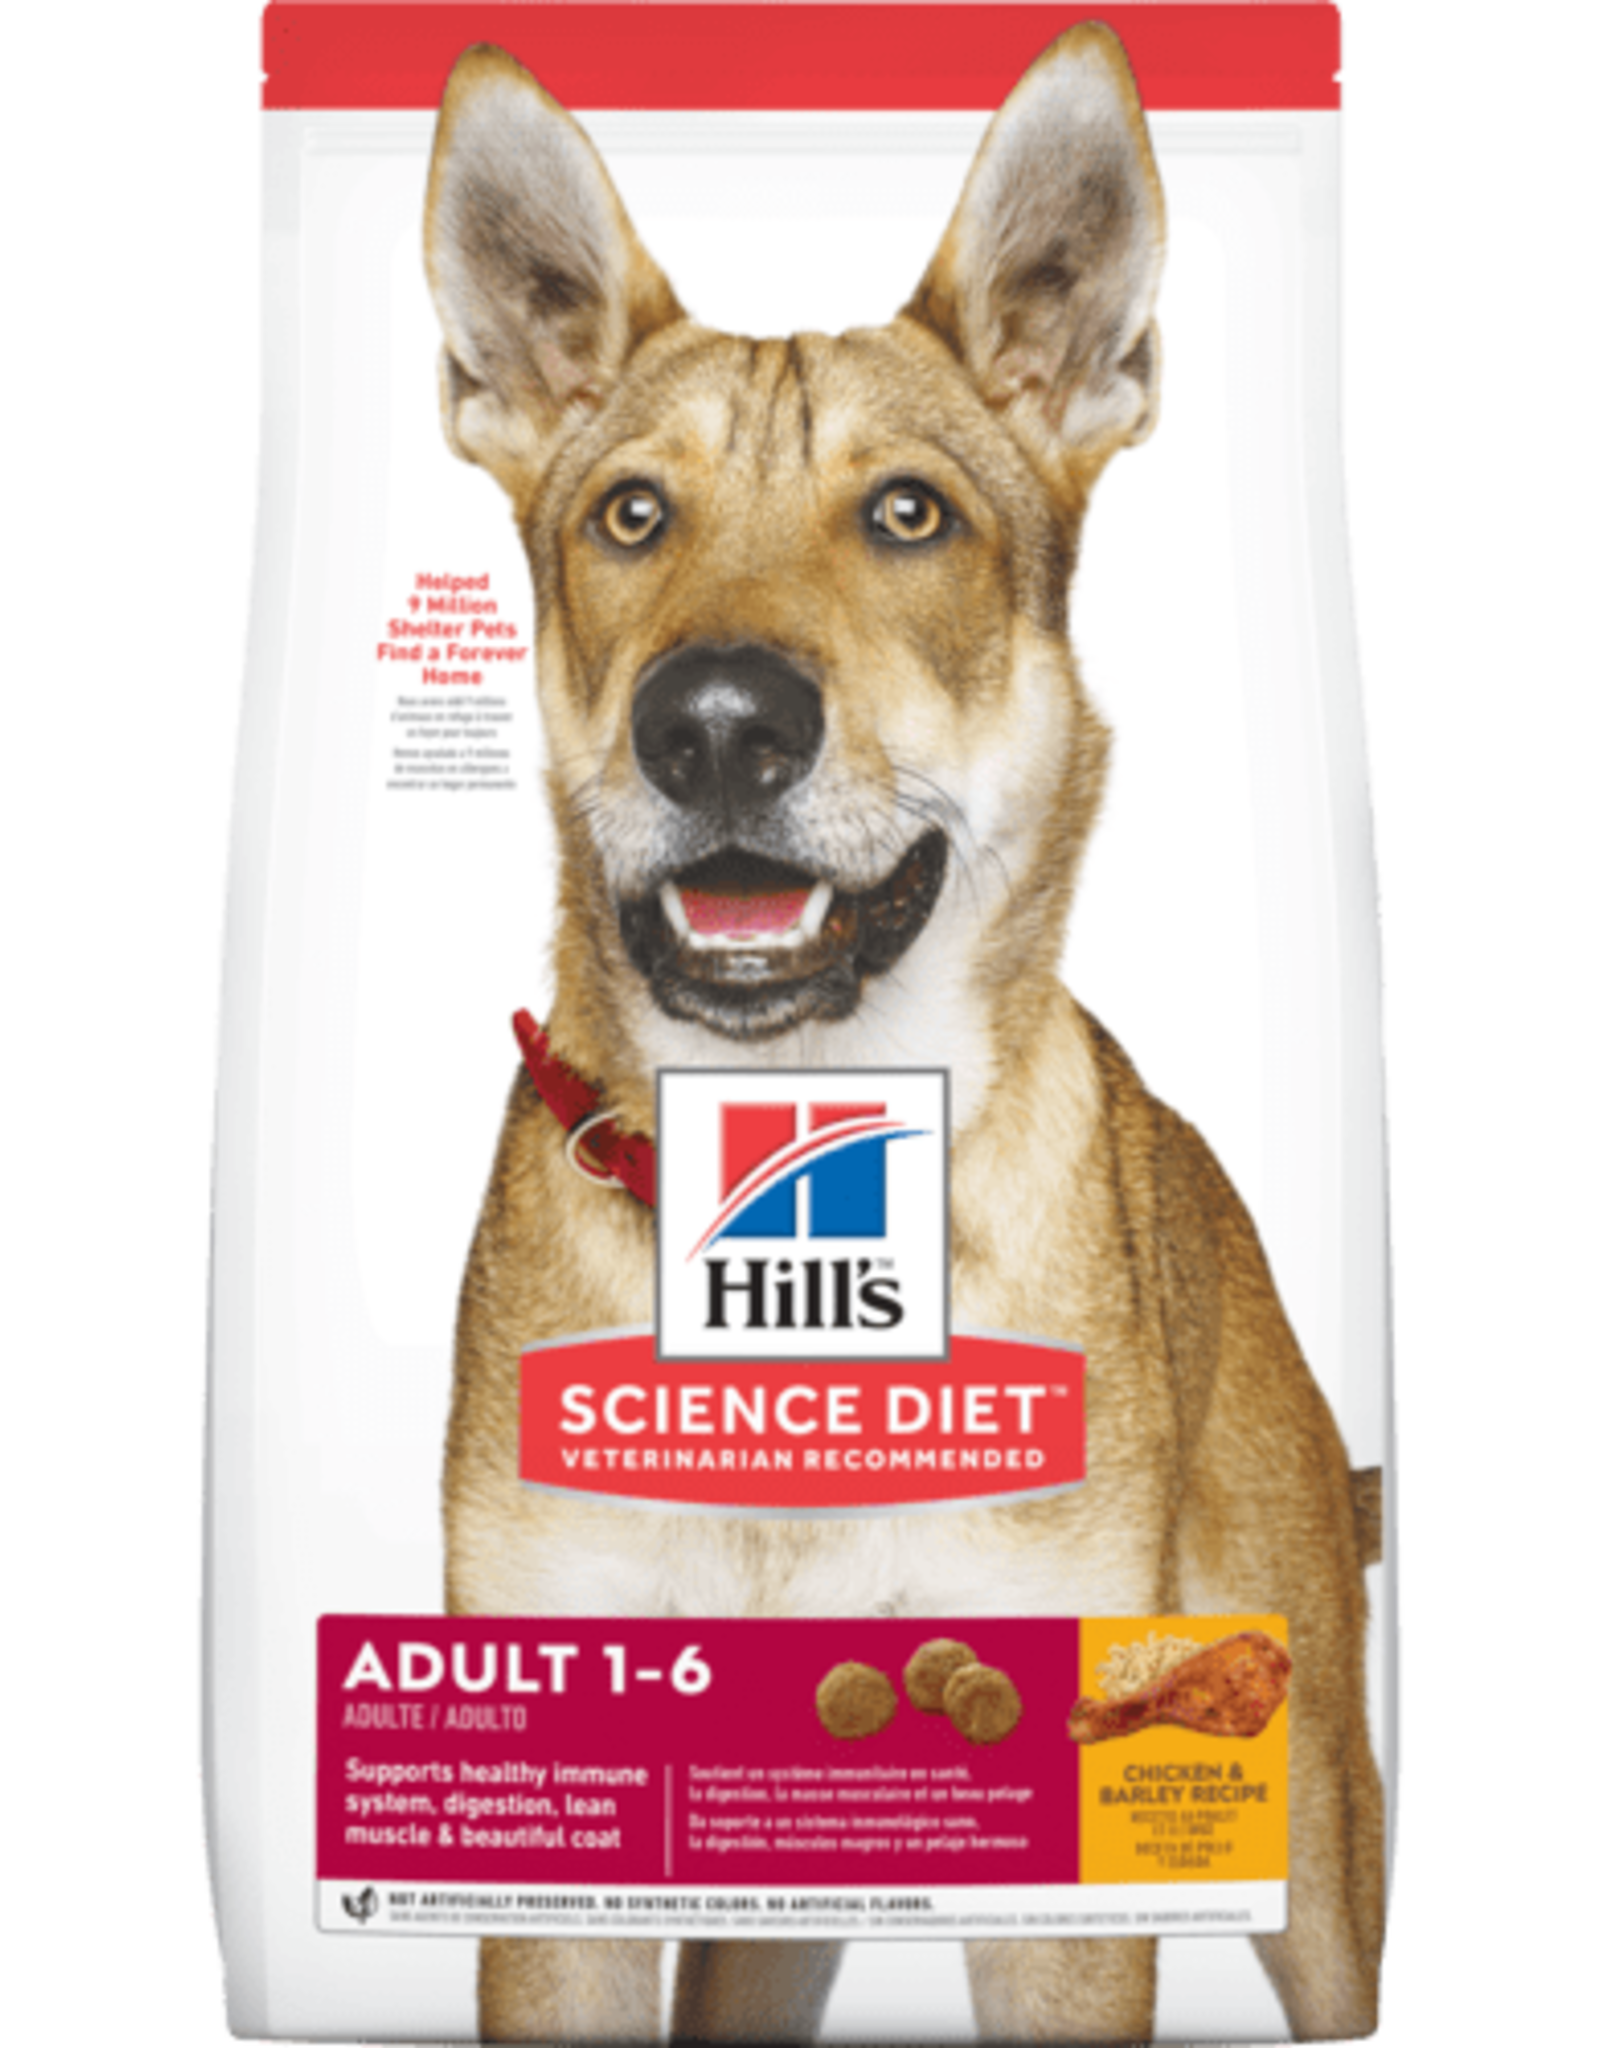 SCIENCE DIET HILL'S SCIENCE DIET CANINE ADULT ORIGINAL 35LBS